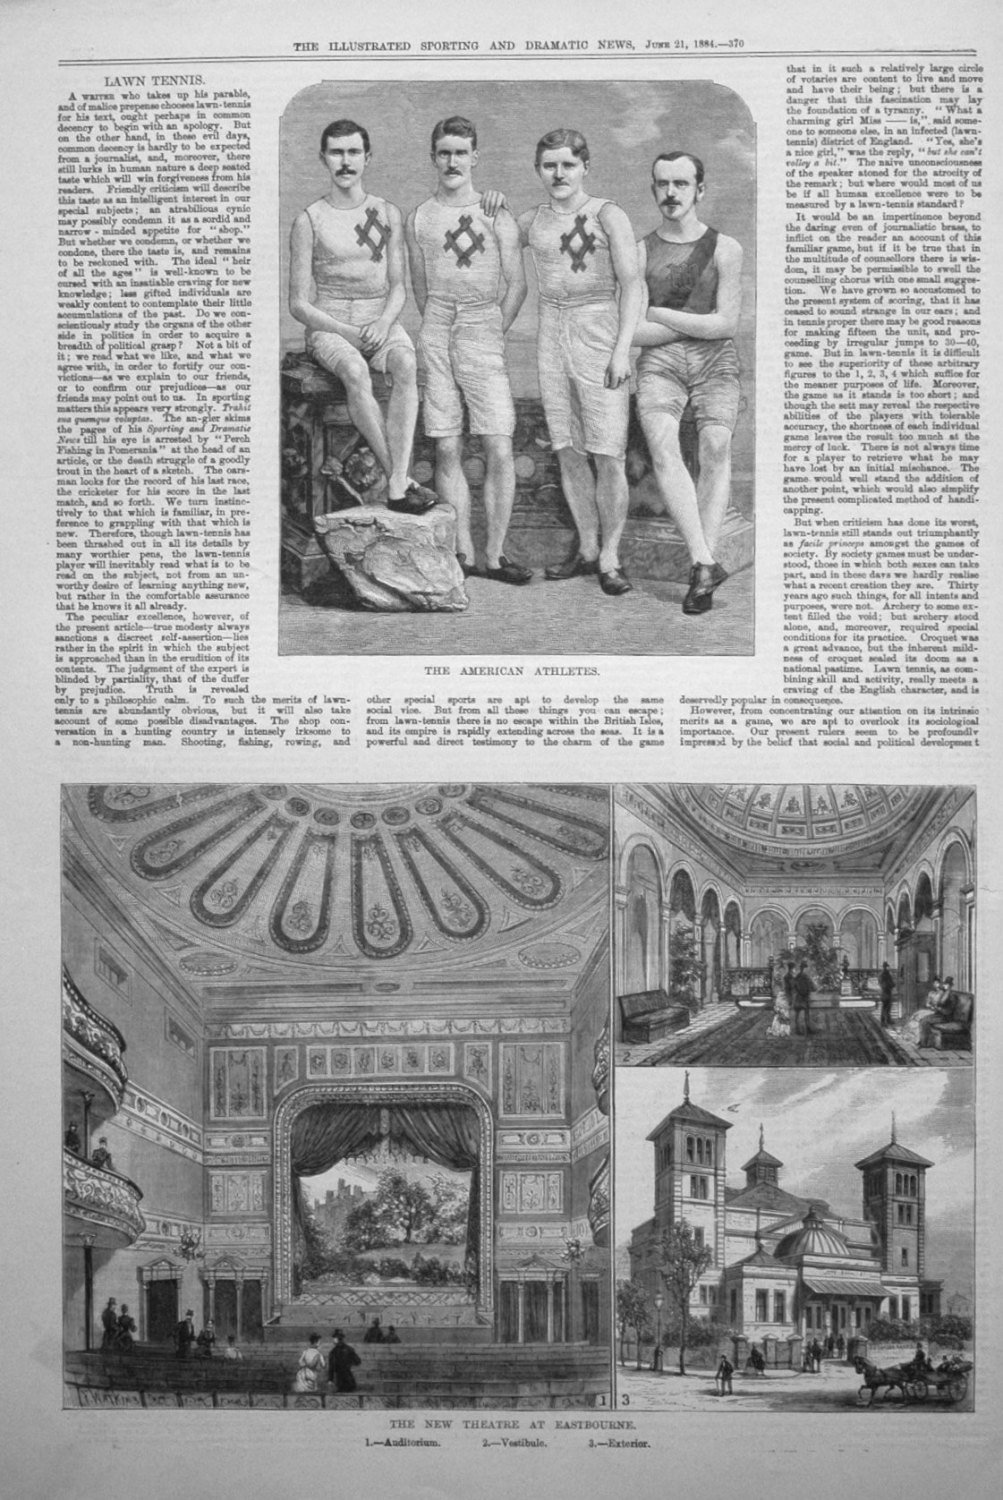 The New Theatre at Eastbourne. 1884